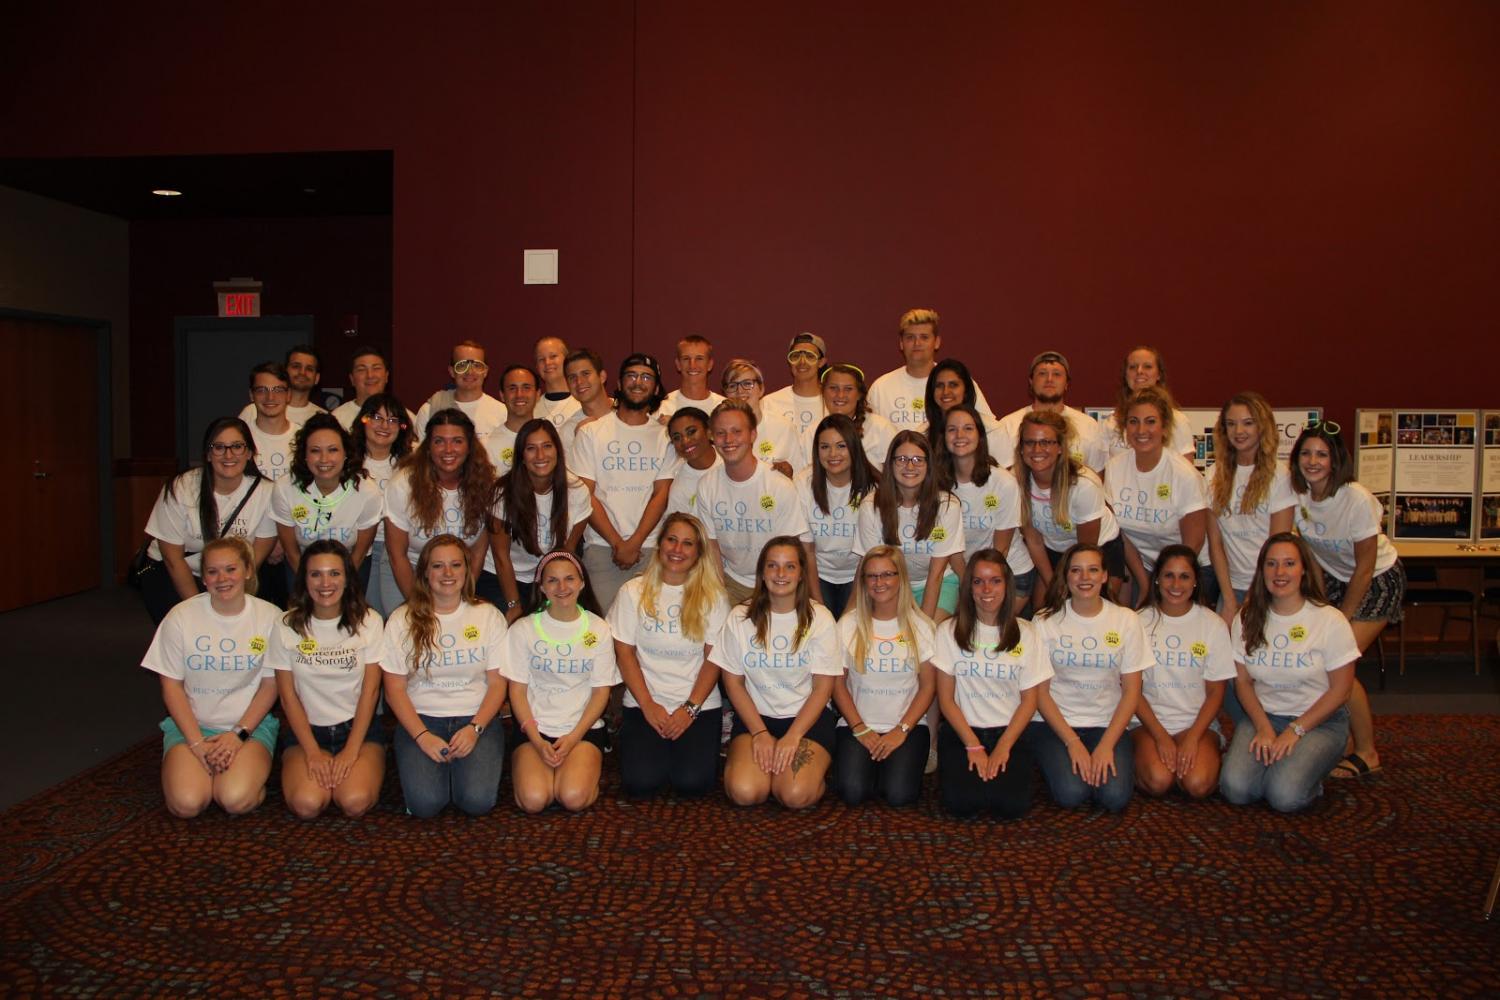 UA Students Go Greek on the Panhellenic Council.